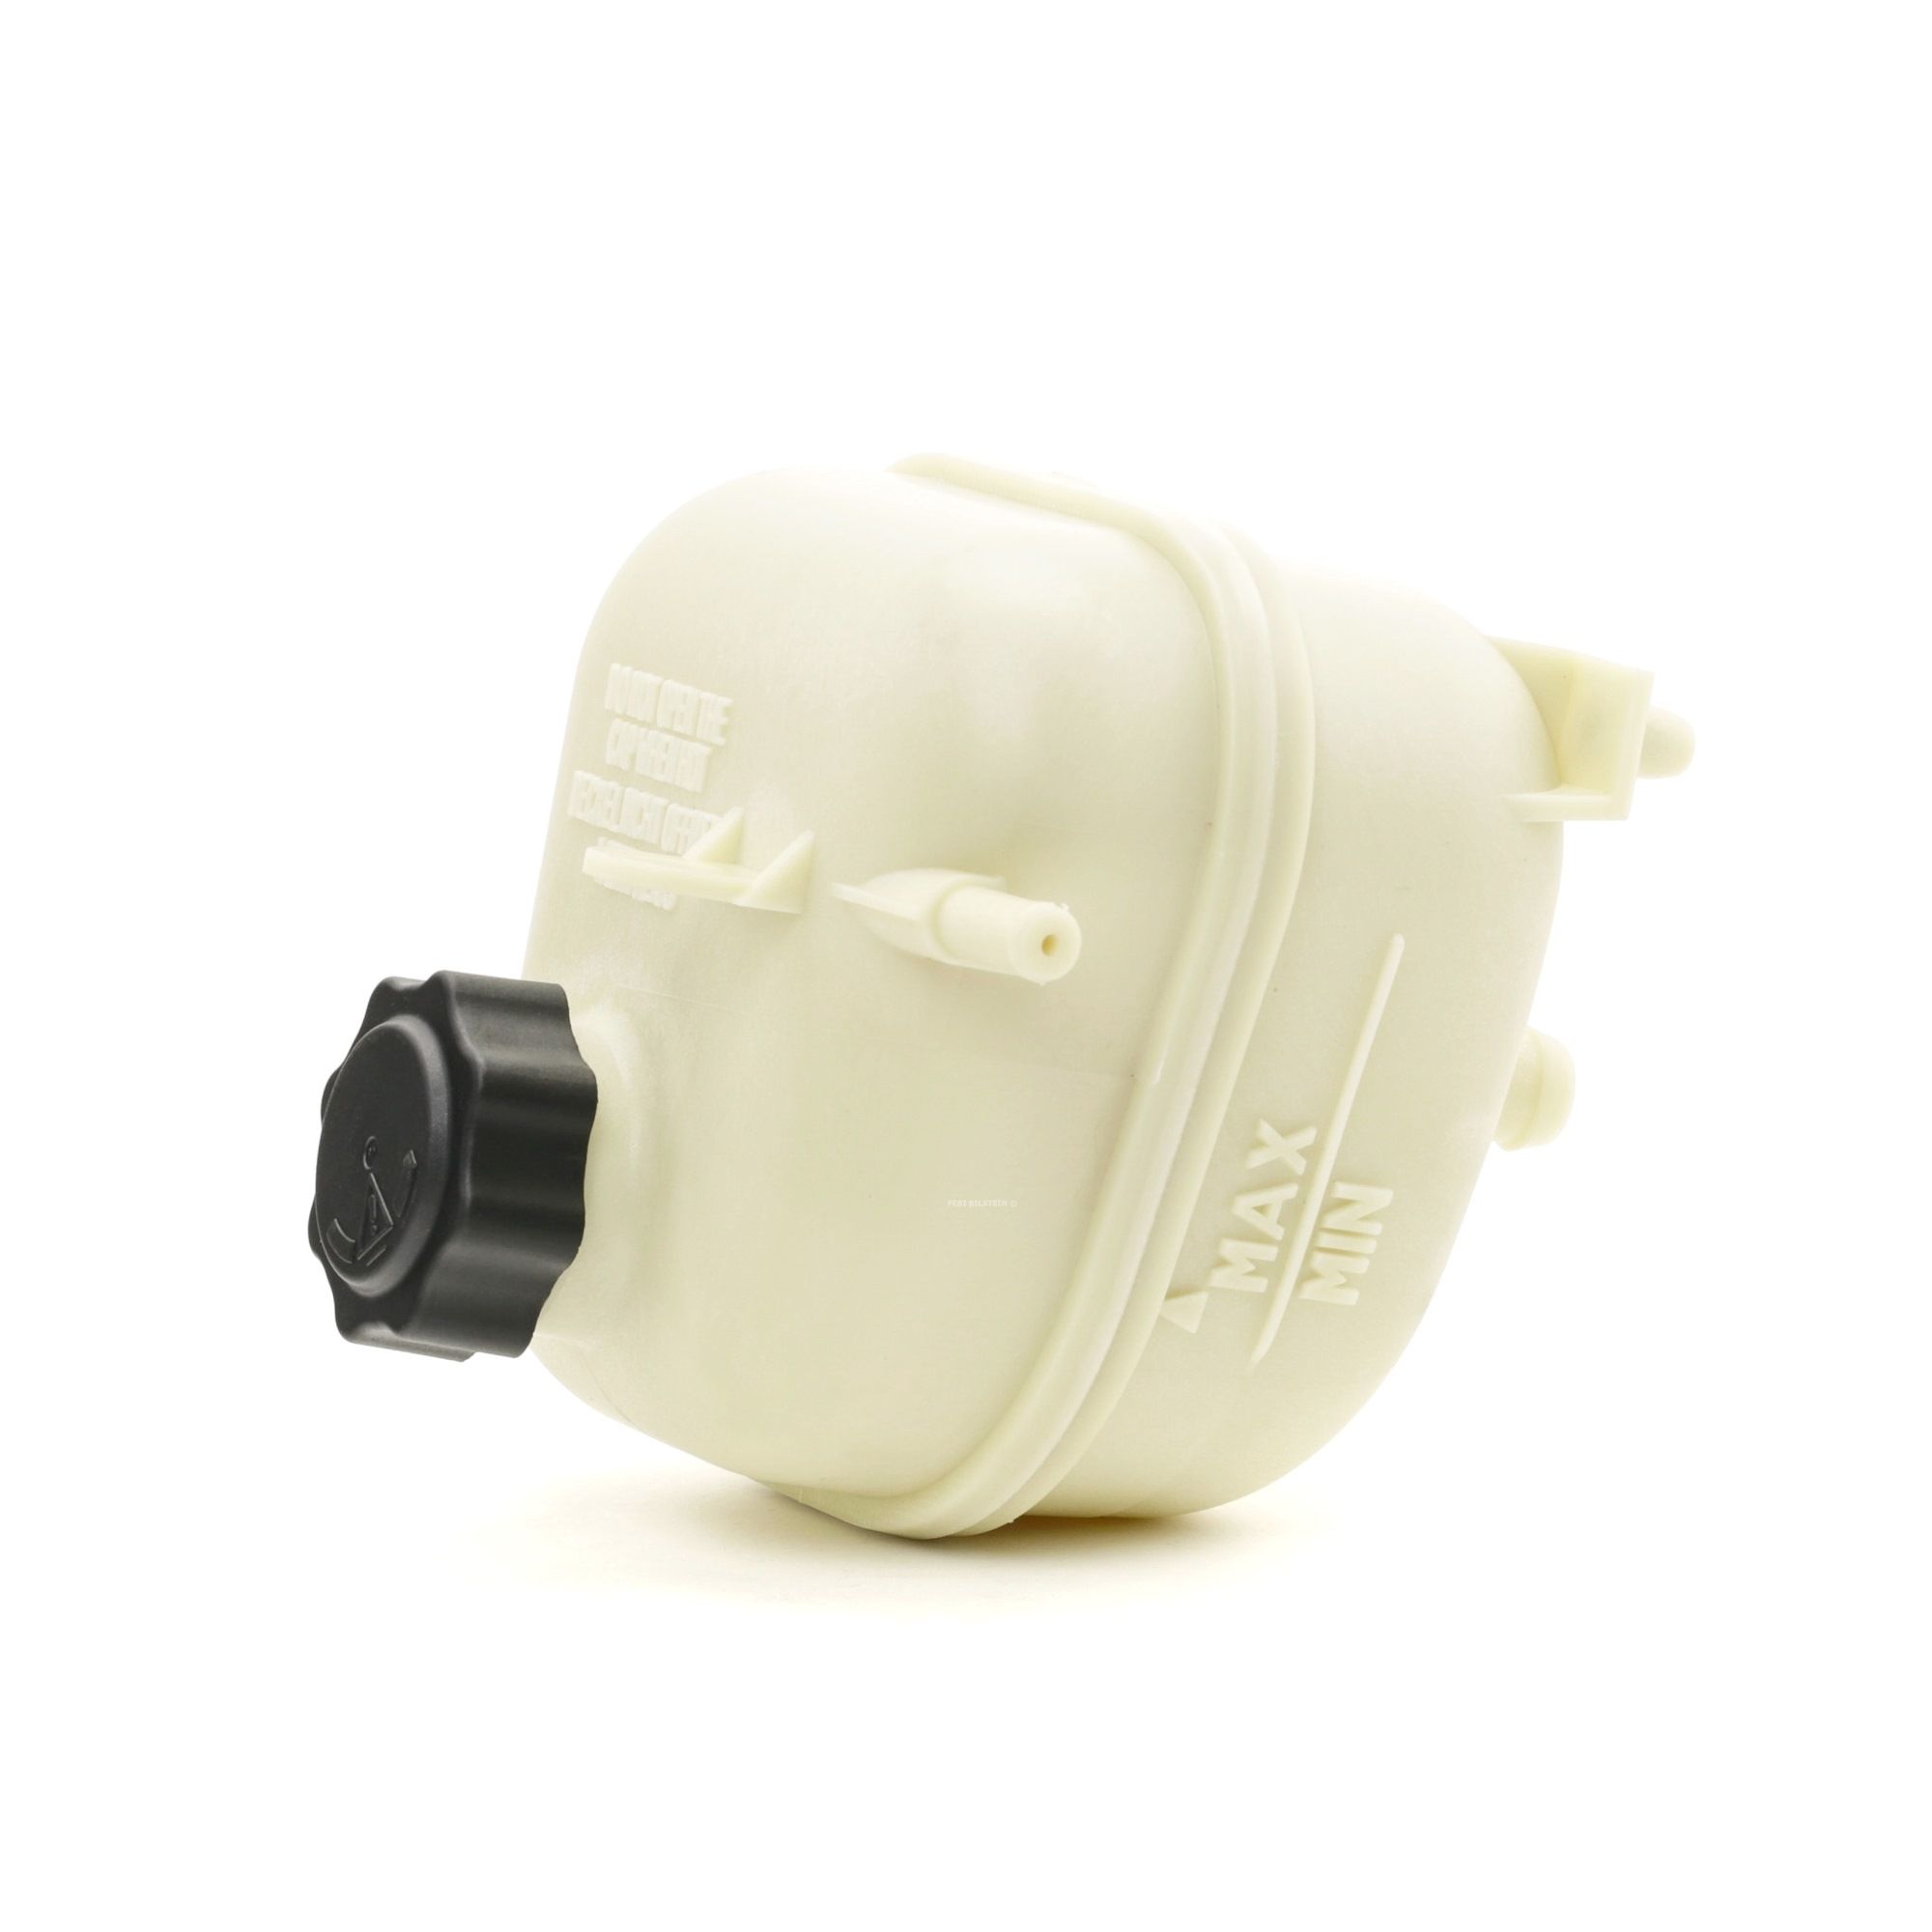 FEBI BILSTEIN 44441 Coolant expansion tank Capacity: 1,25l, with lid